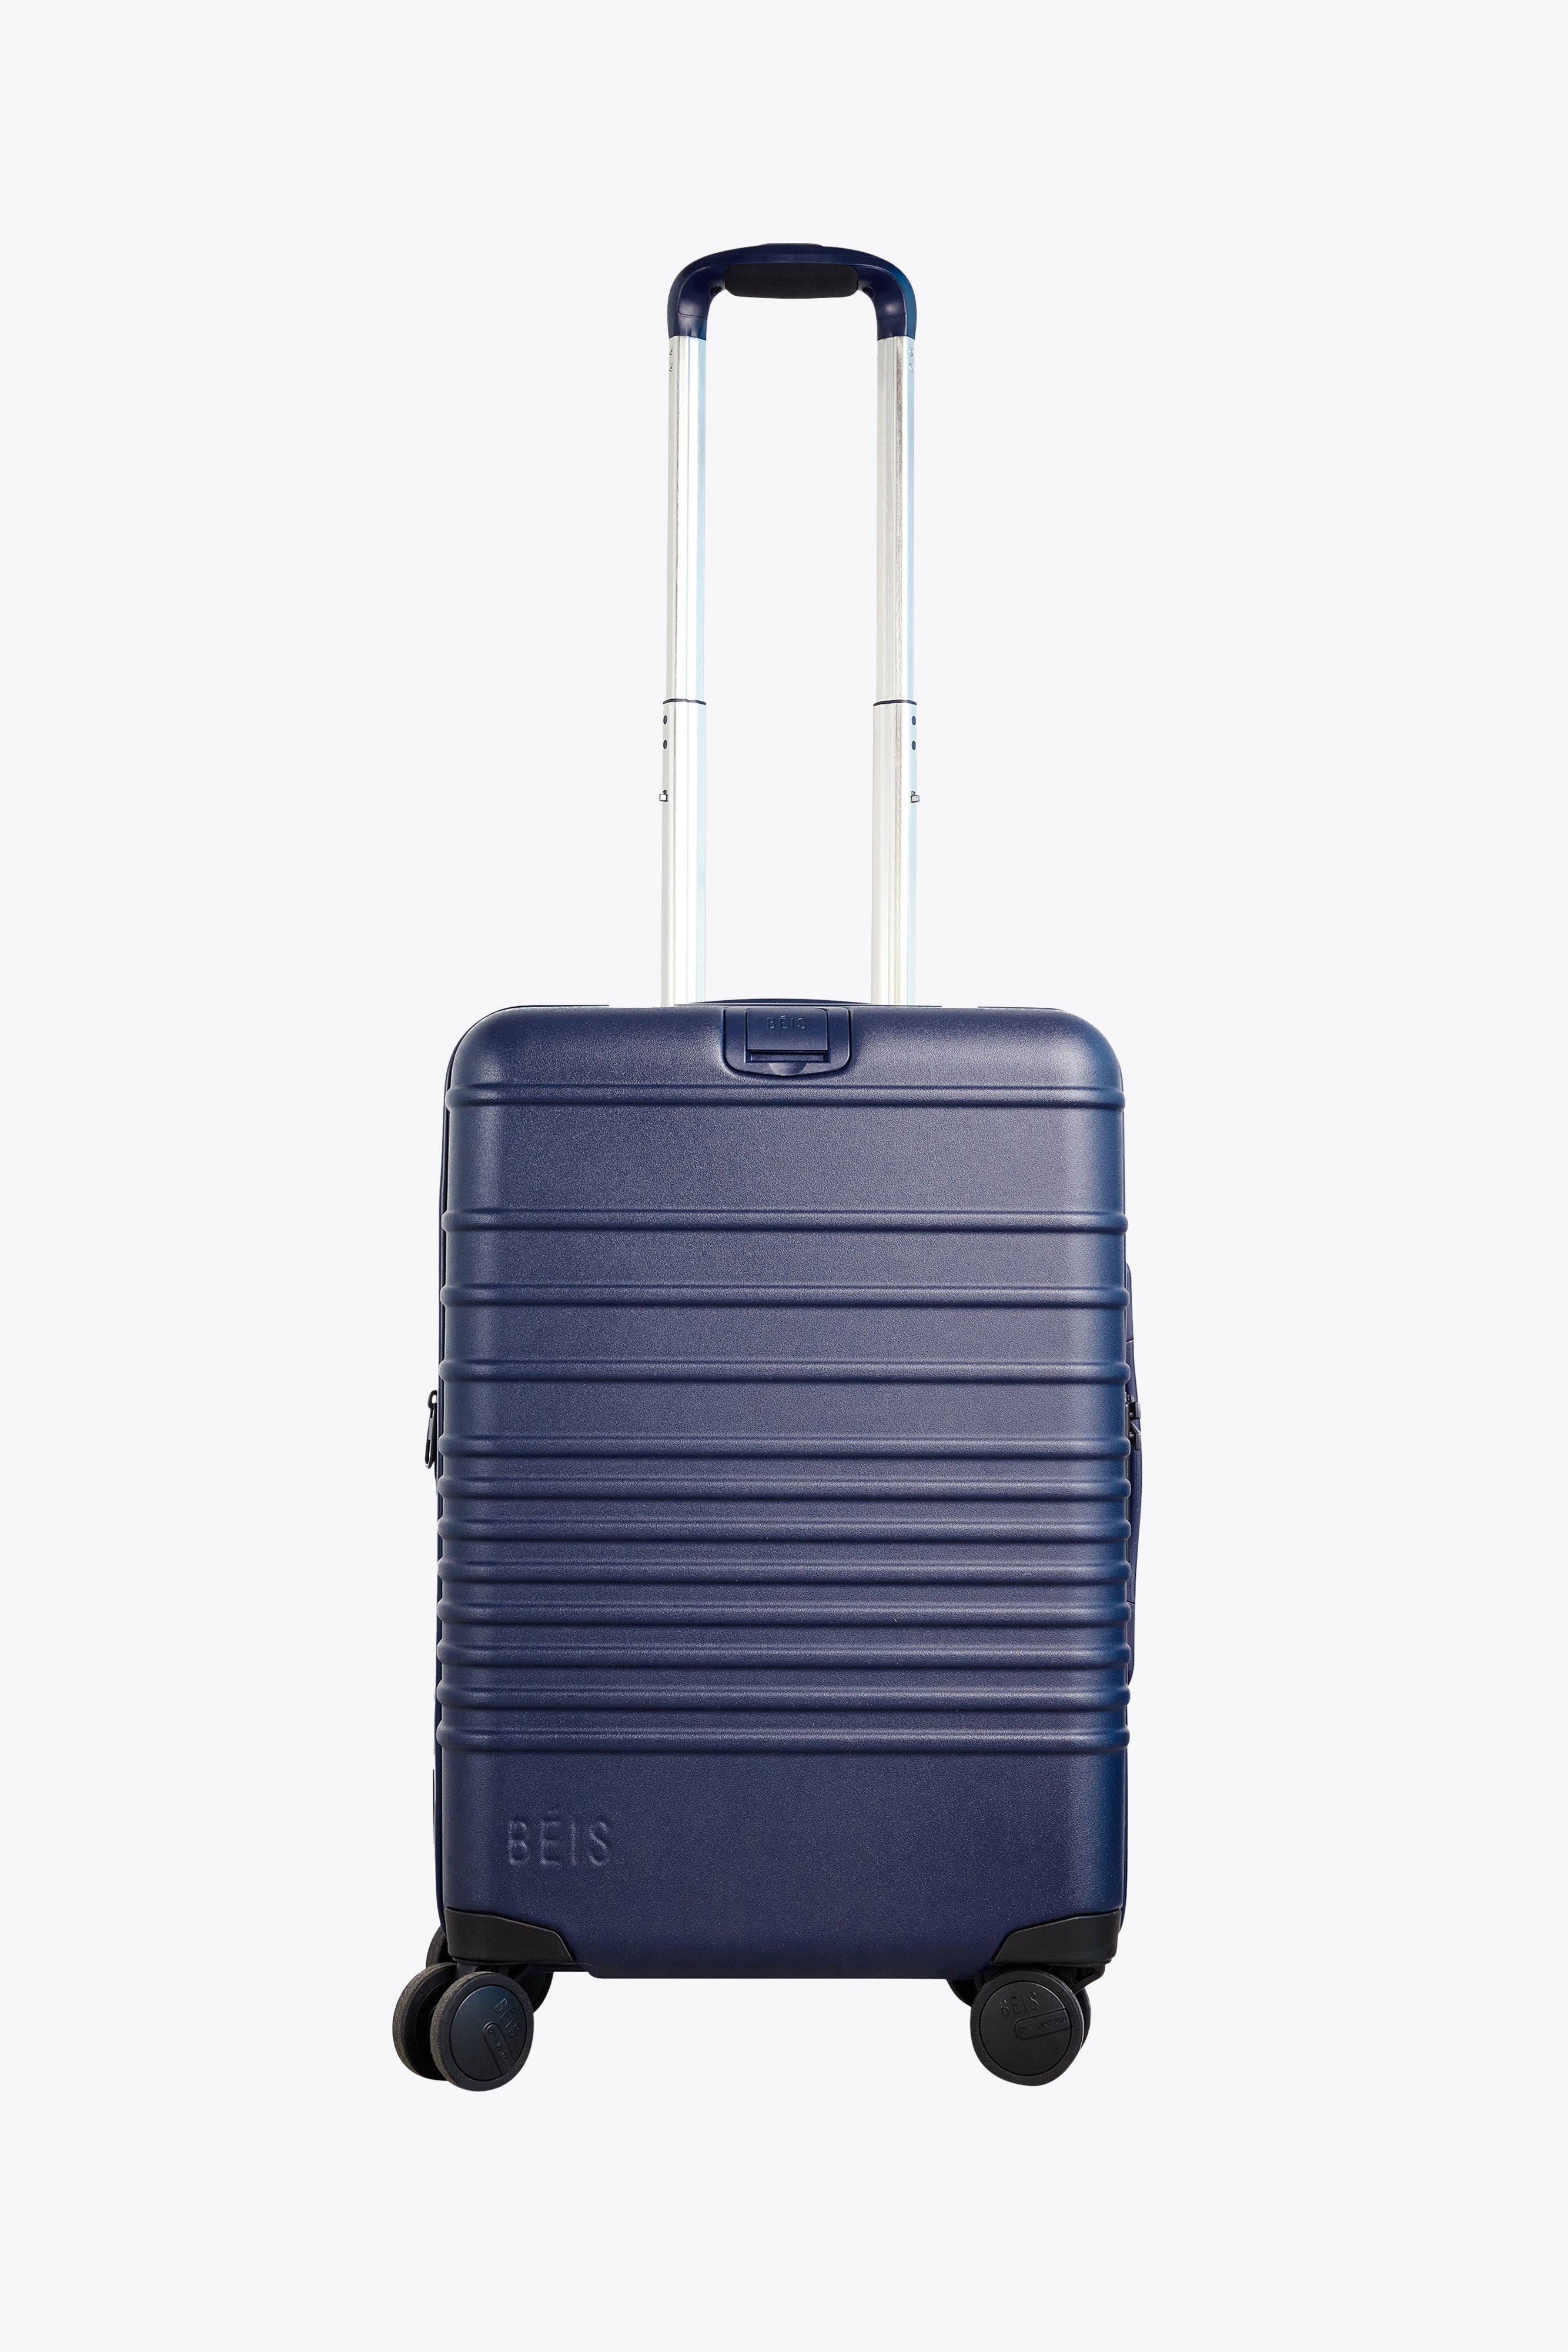 BÉIS 'The Carry-On Roller' in Navy - 21 Carry-On Rolling Hand Luggage in  Navy Blue | BÉIS Travel CA